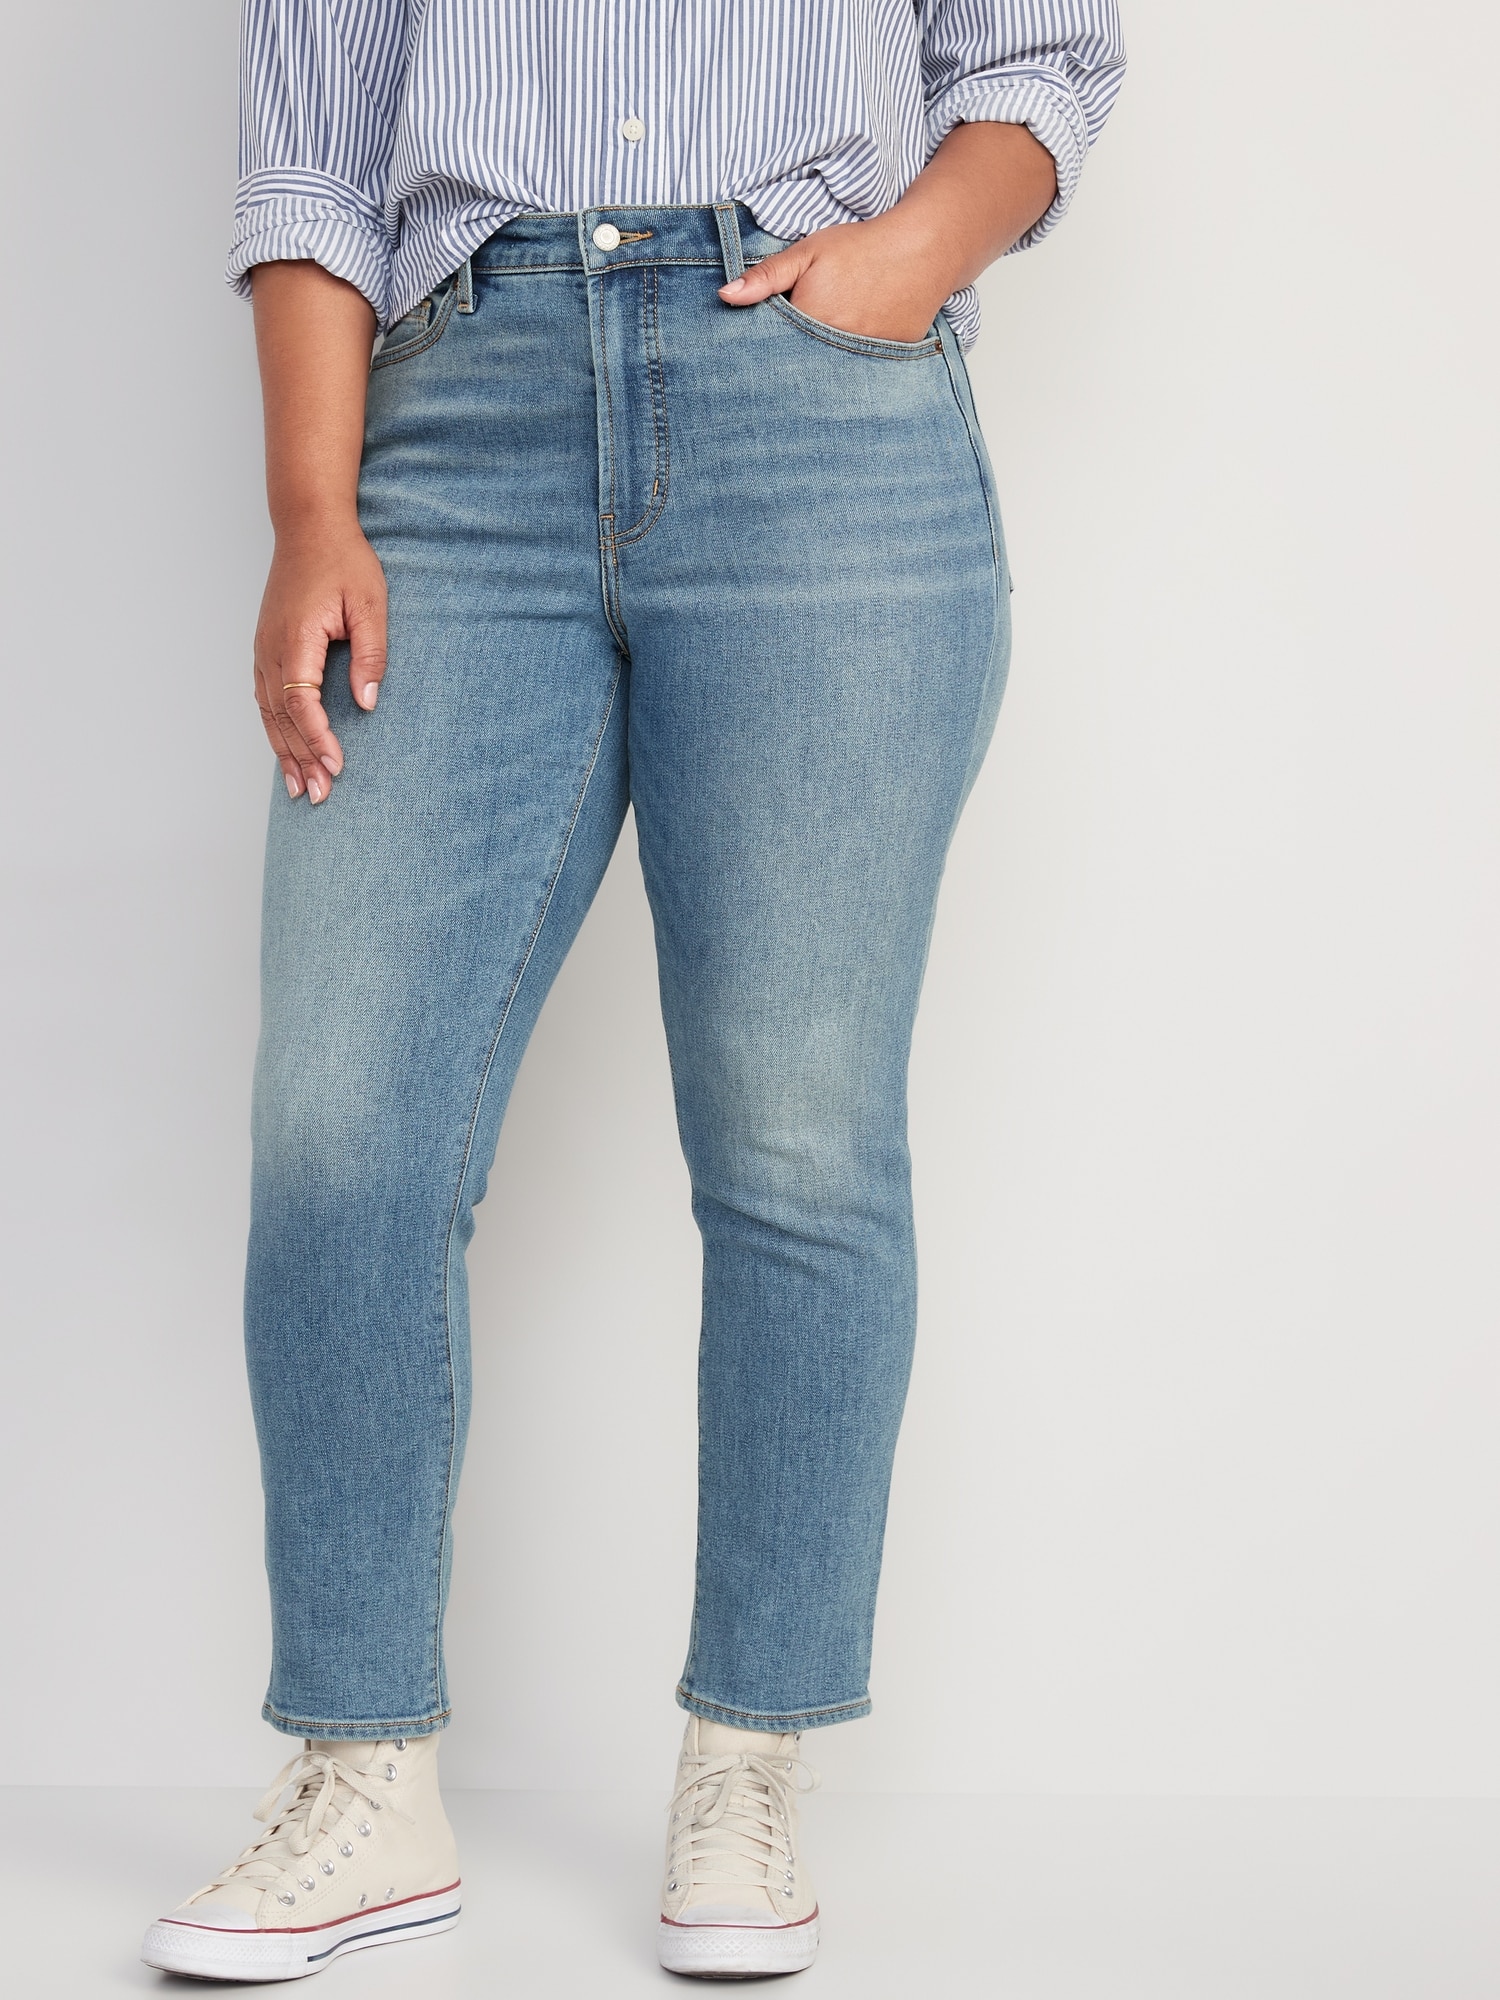 High-Waisted OG Straight Built-In Warm Ankle Jeans for Women | Old Navy